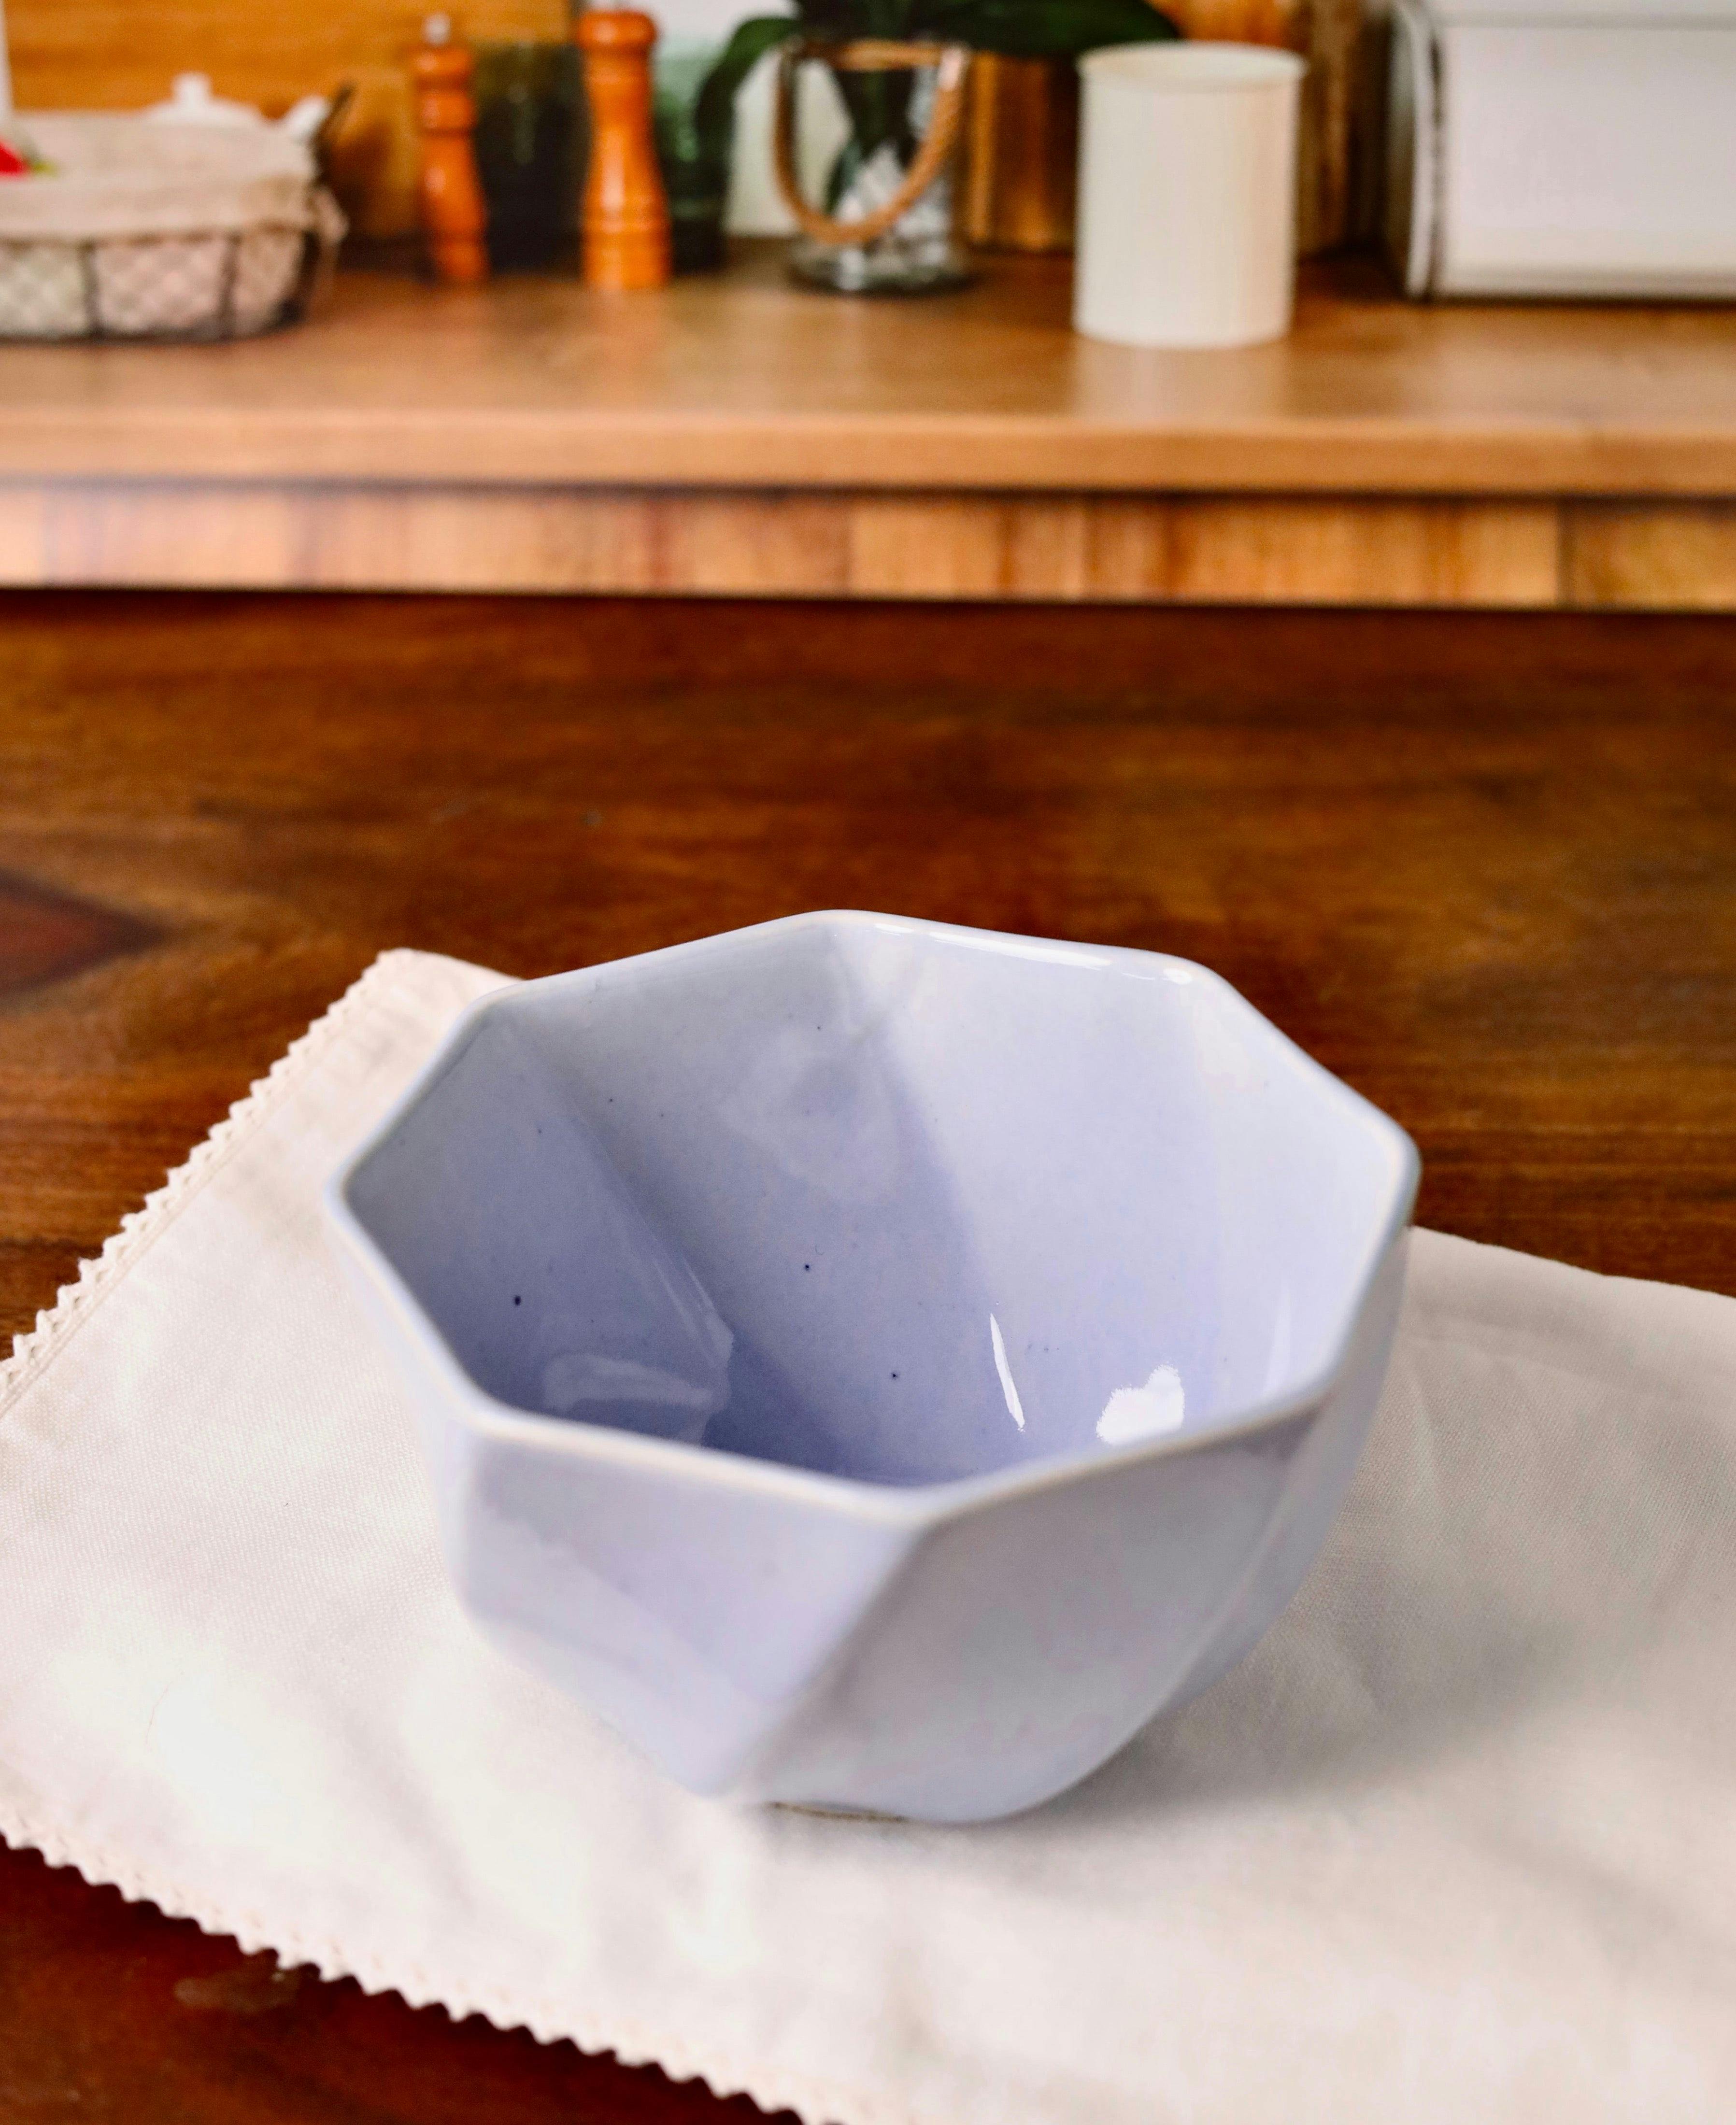 Lavender Hexagon Serving Bowl Small, a product by Olive Home accent